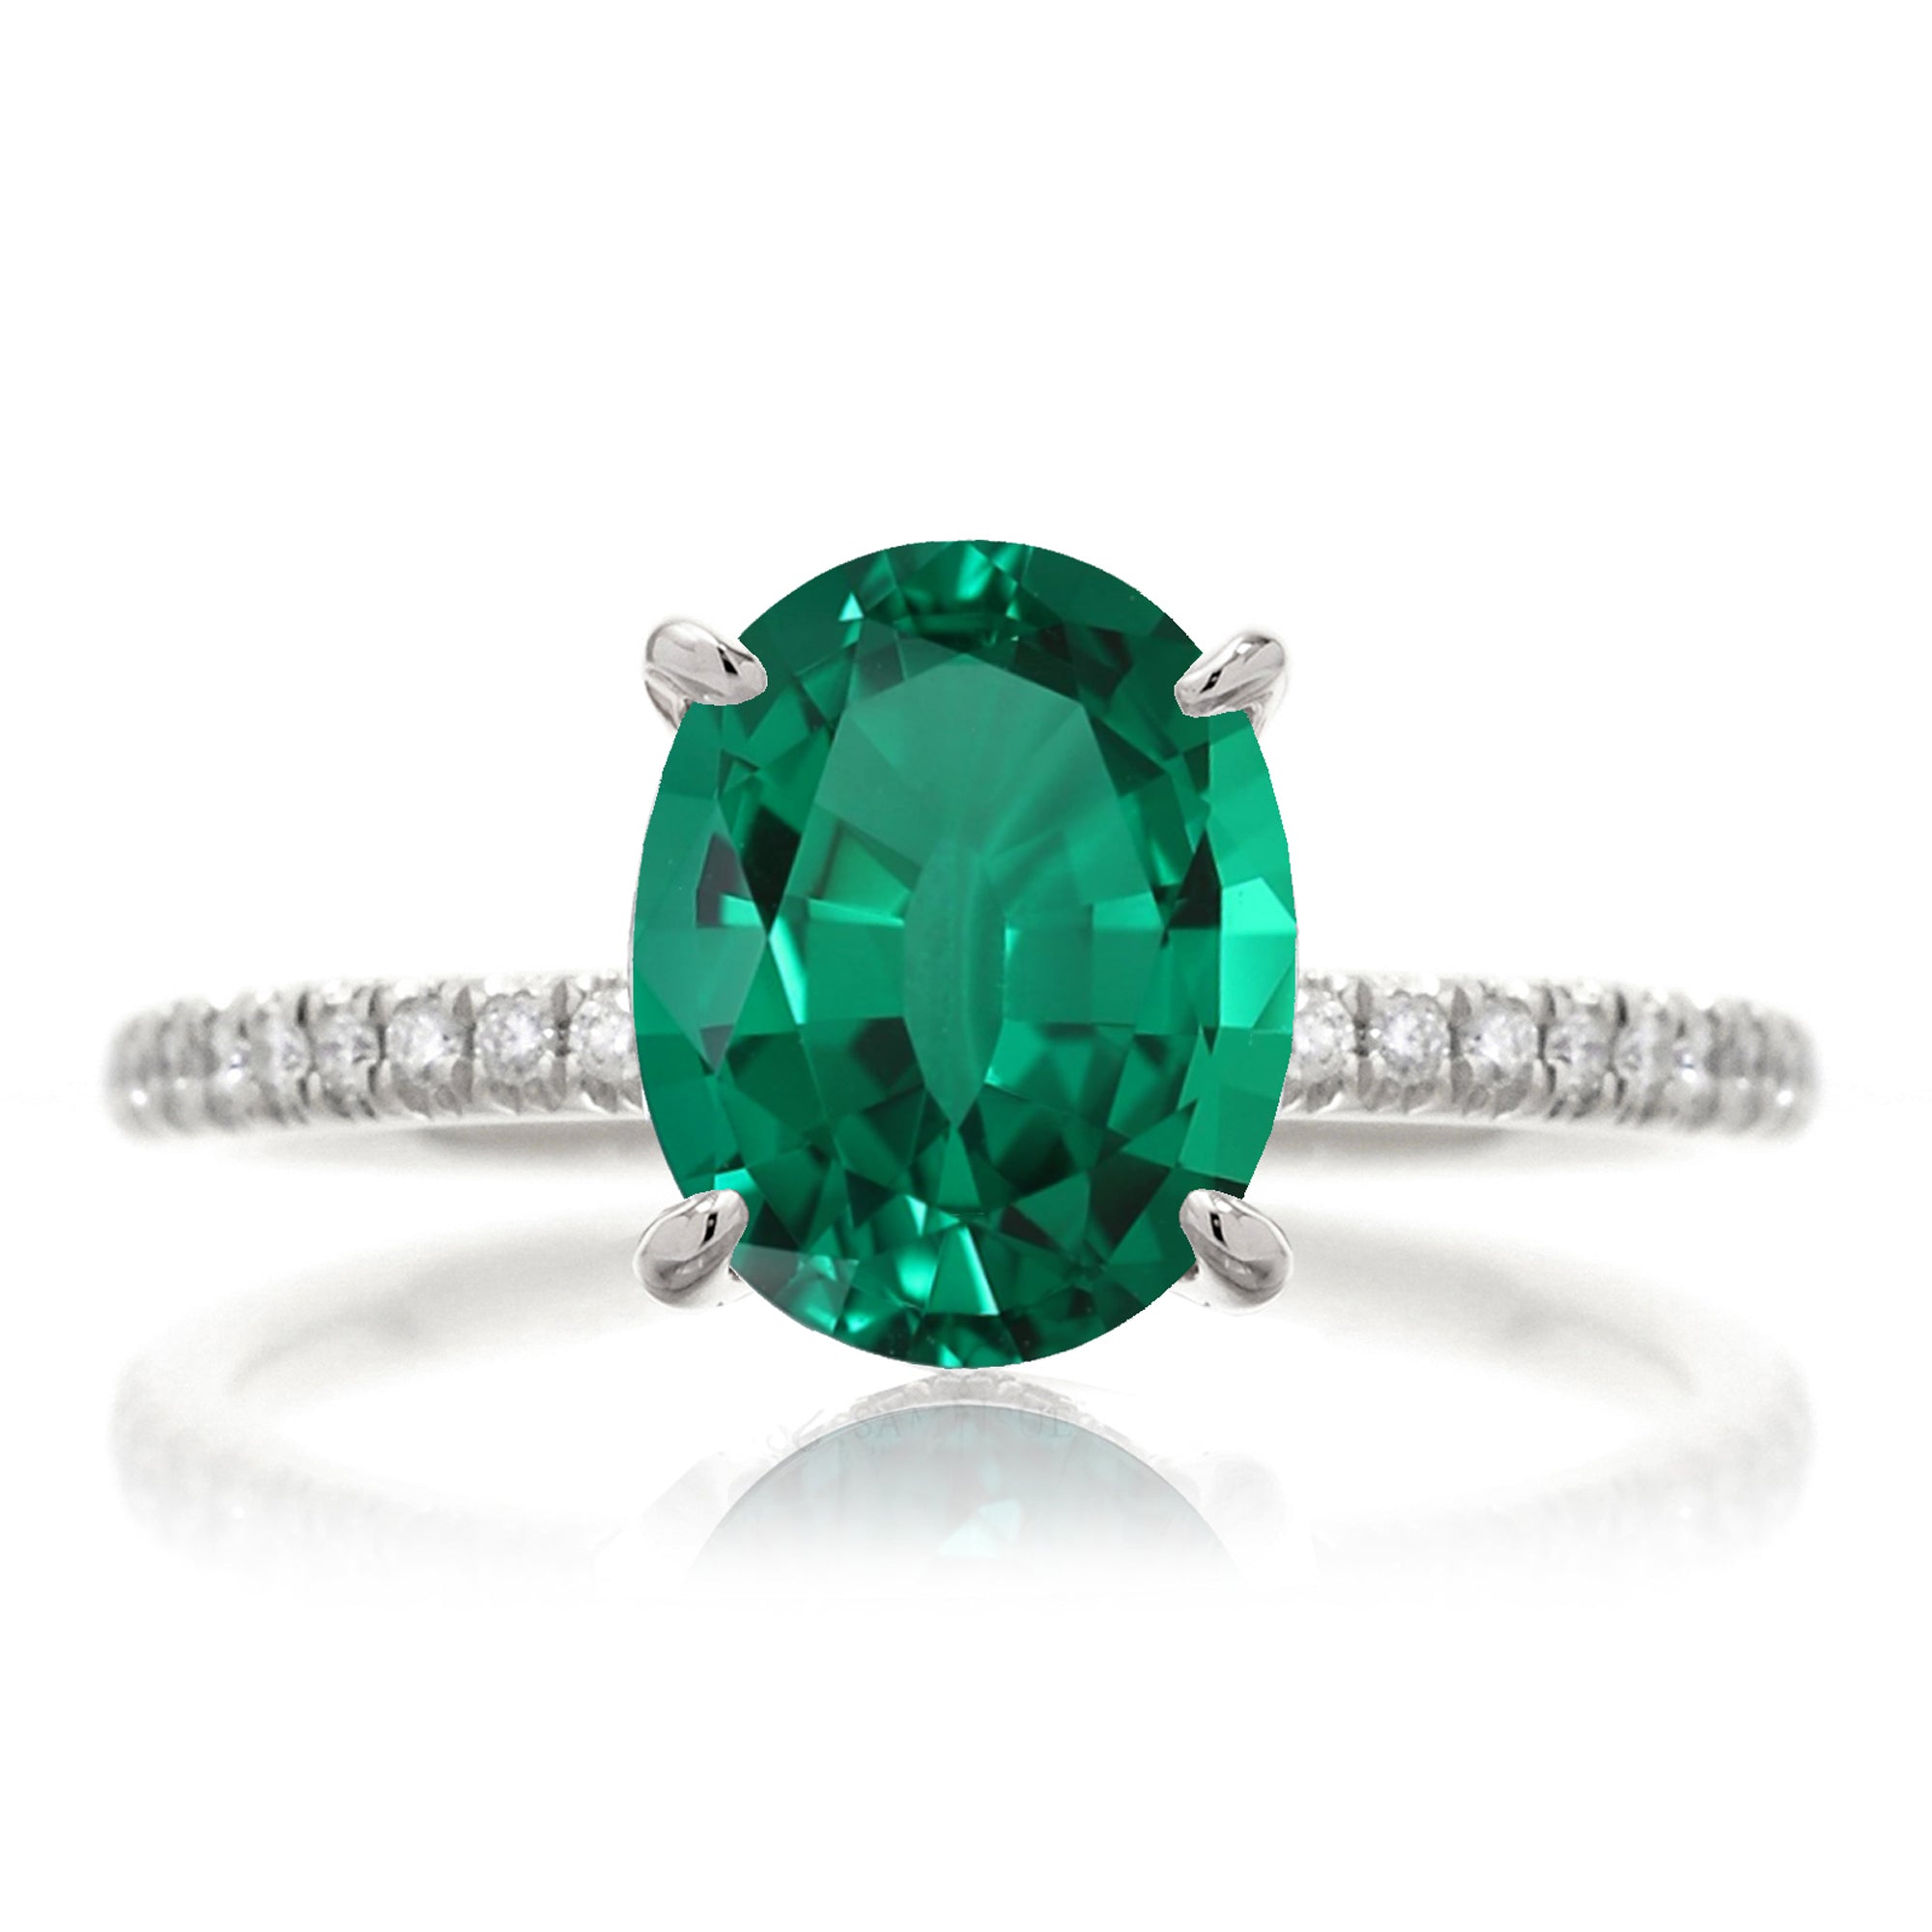 Oval green emerald diamond band engagement ring white gold - the Ava